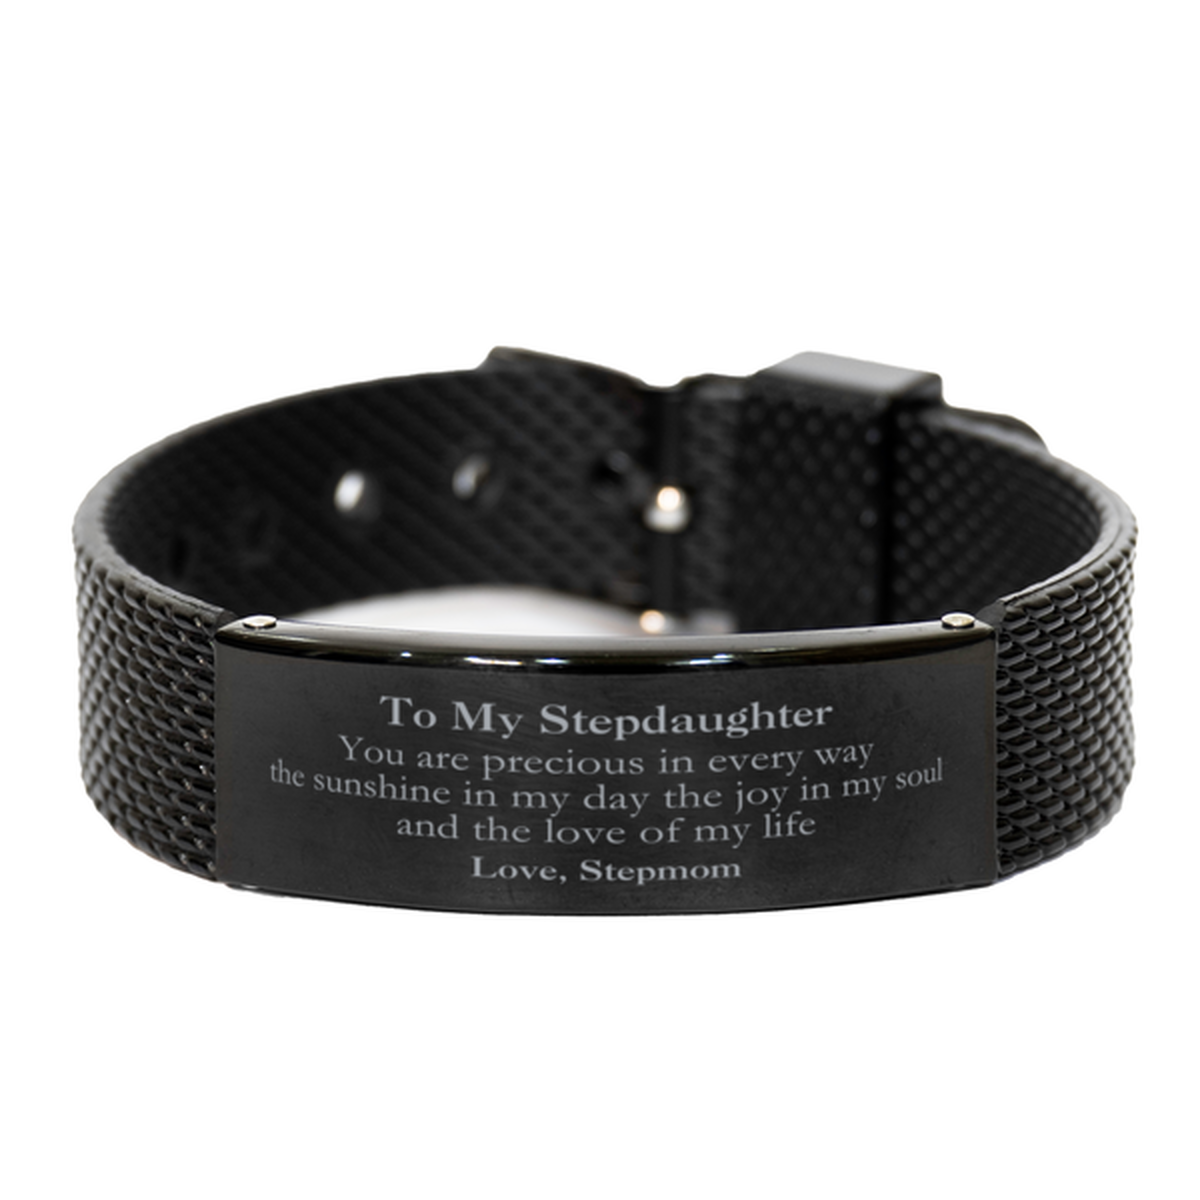 Graduation Gifts for Stepdaughter Black Shark Mesh Bracelet Present from Stepmom, Christmas Stepdaughter Birthday Gifts Stepdaughter You are precious in every way the sunshine in my day. Love, Stepmom